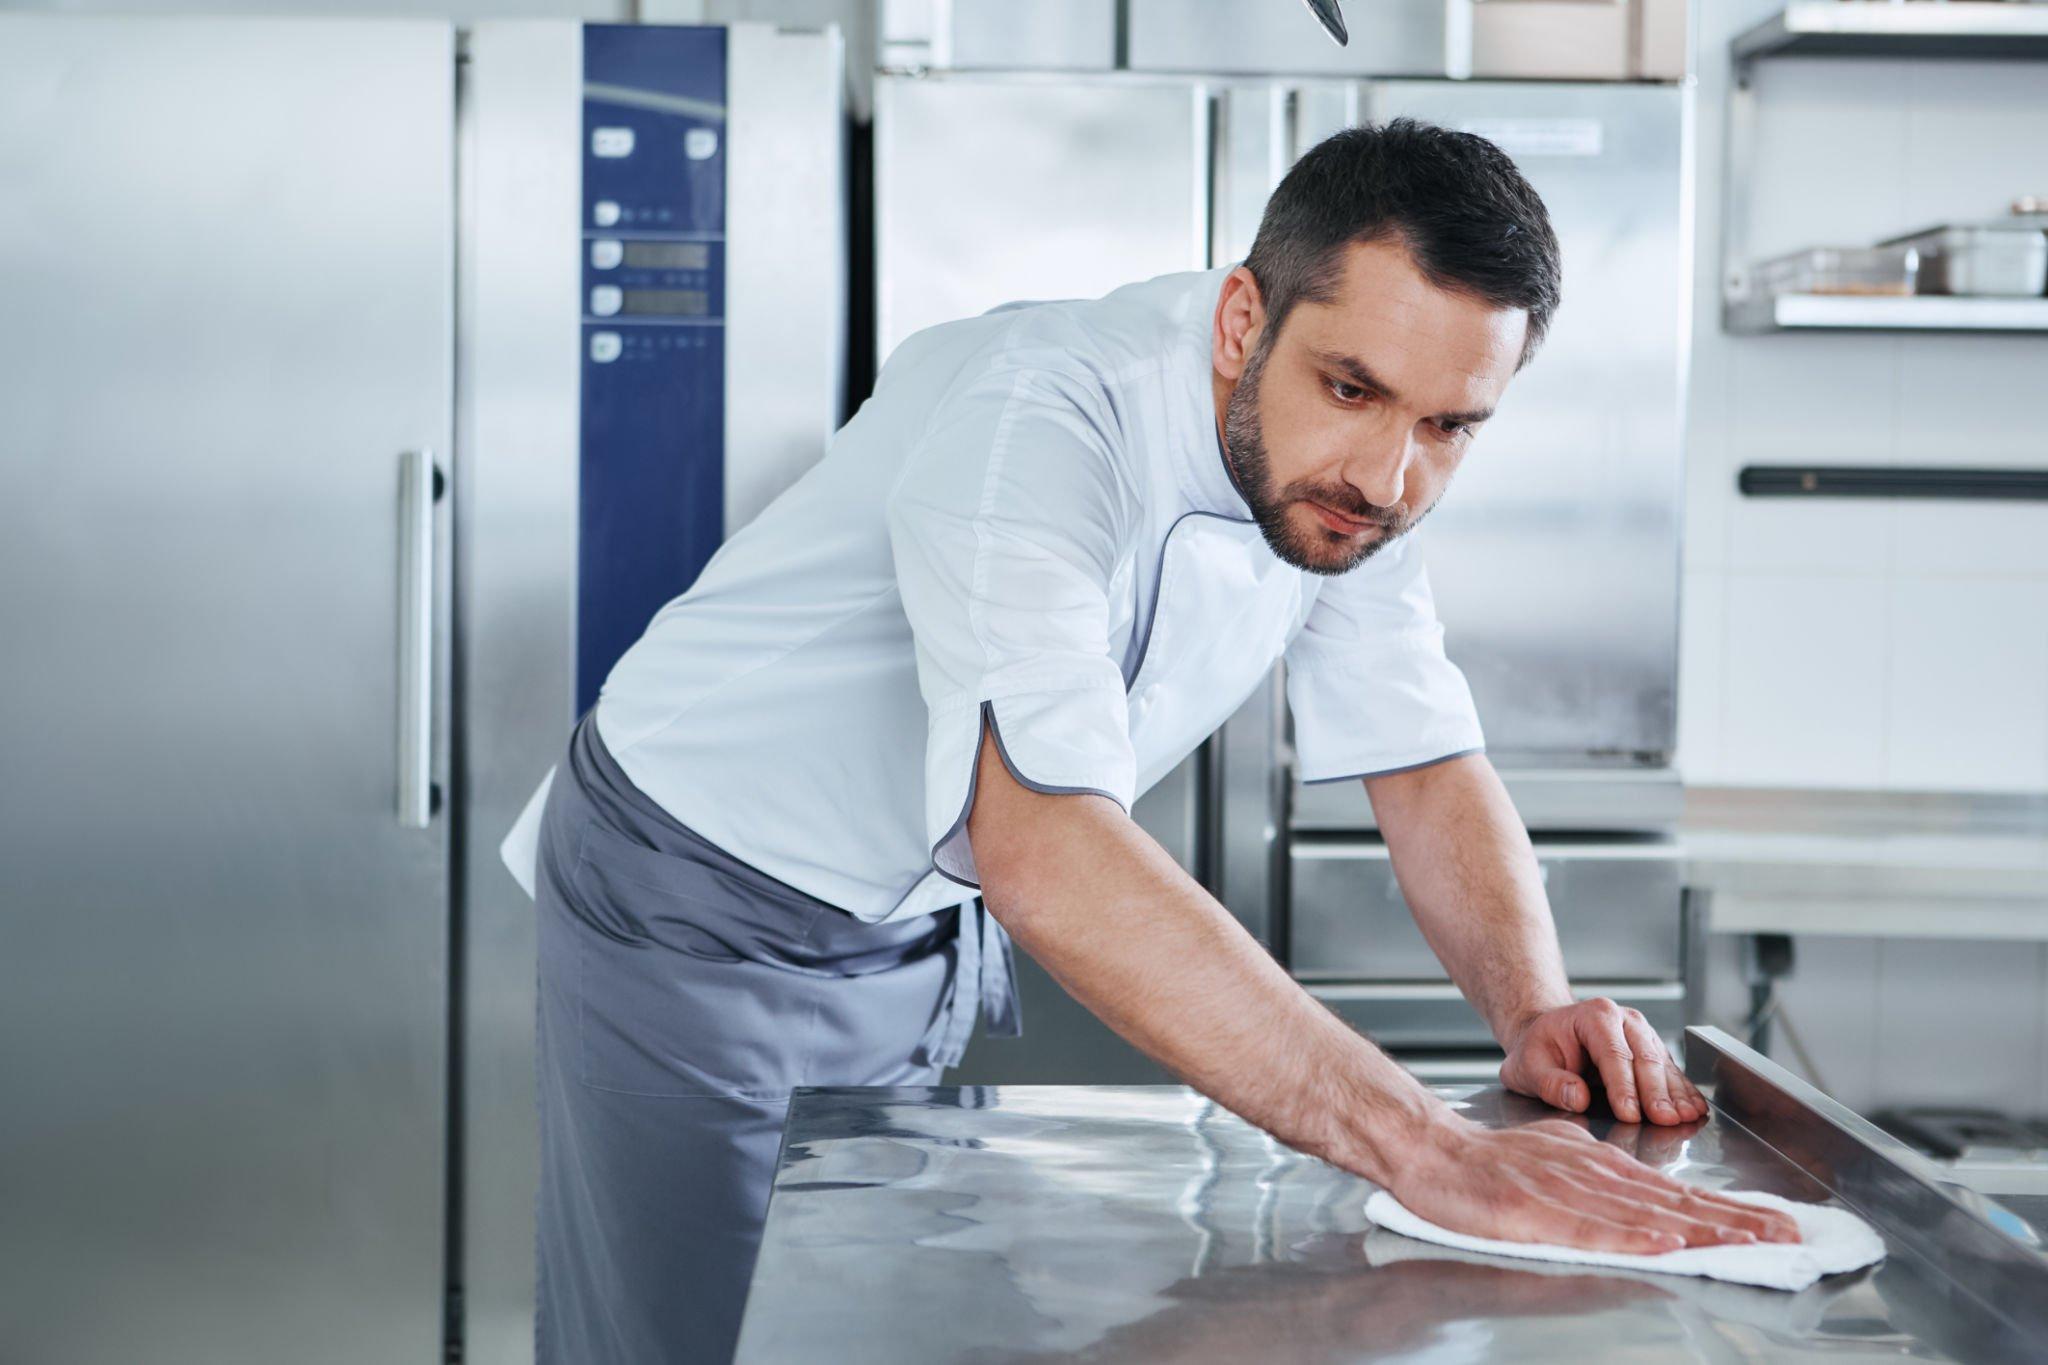 10 Easy Tips for Keeping Your Kitchen Sparkling Clean